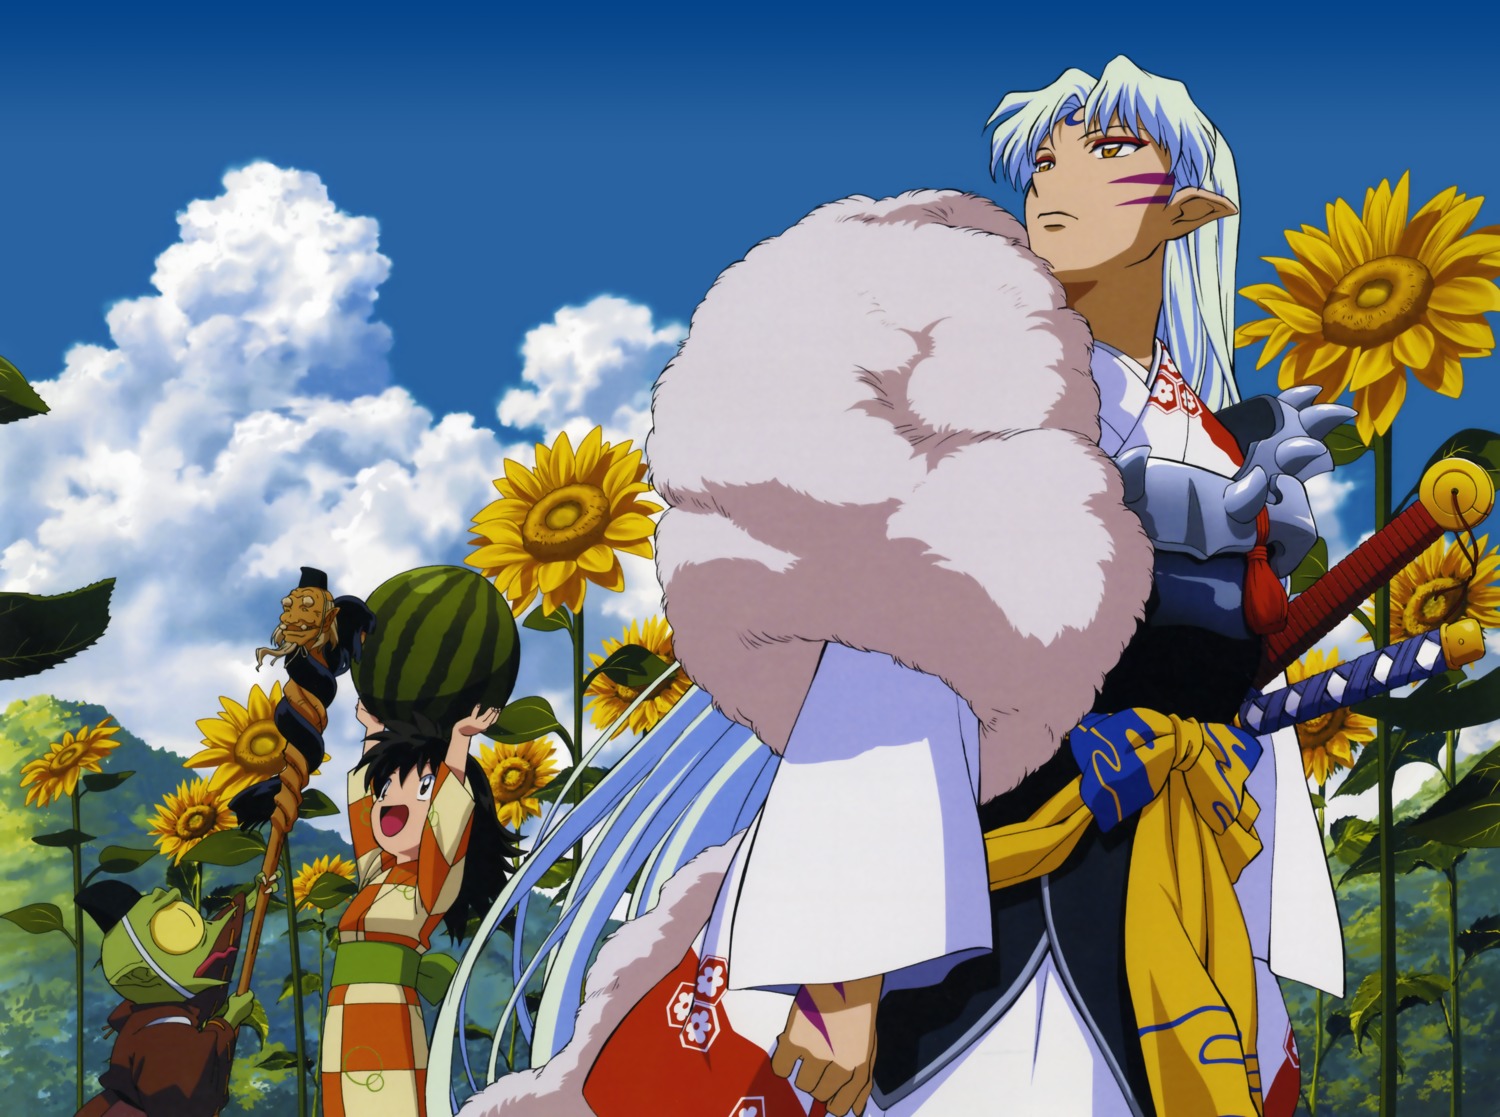 Download Cunning Jaken from Inuyasha anime series Wallpaper | Wallpapers.com